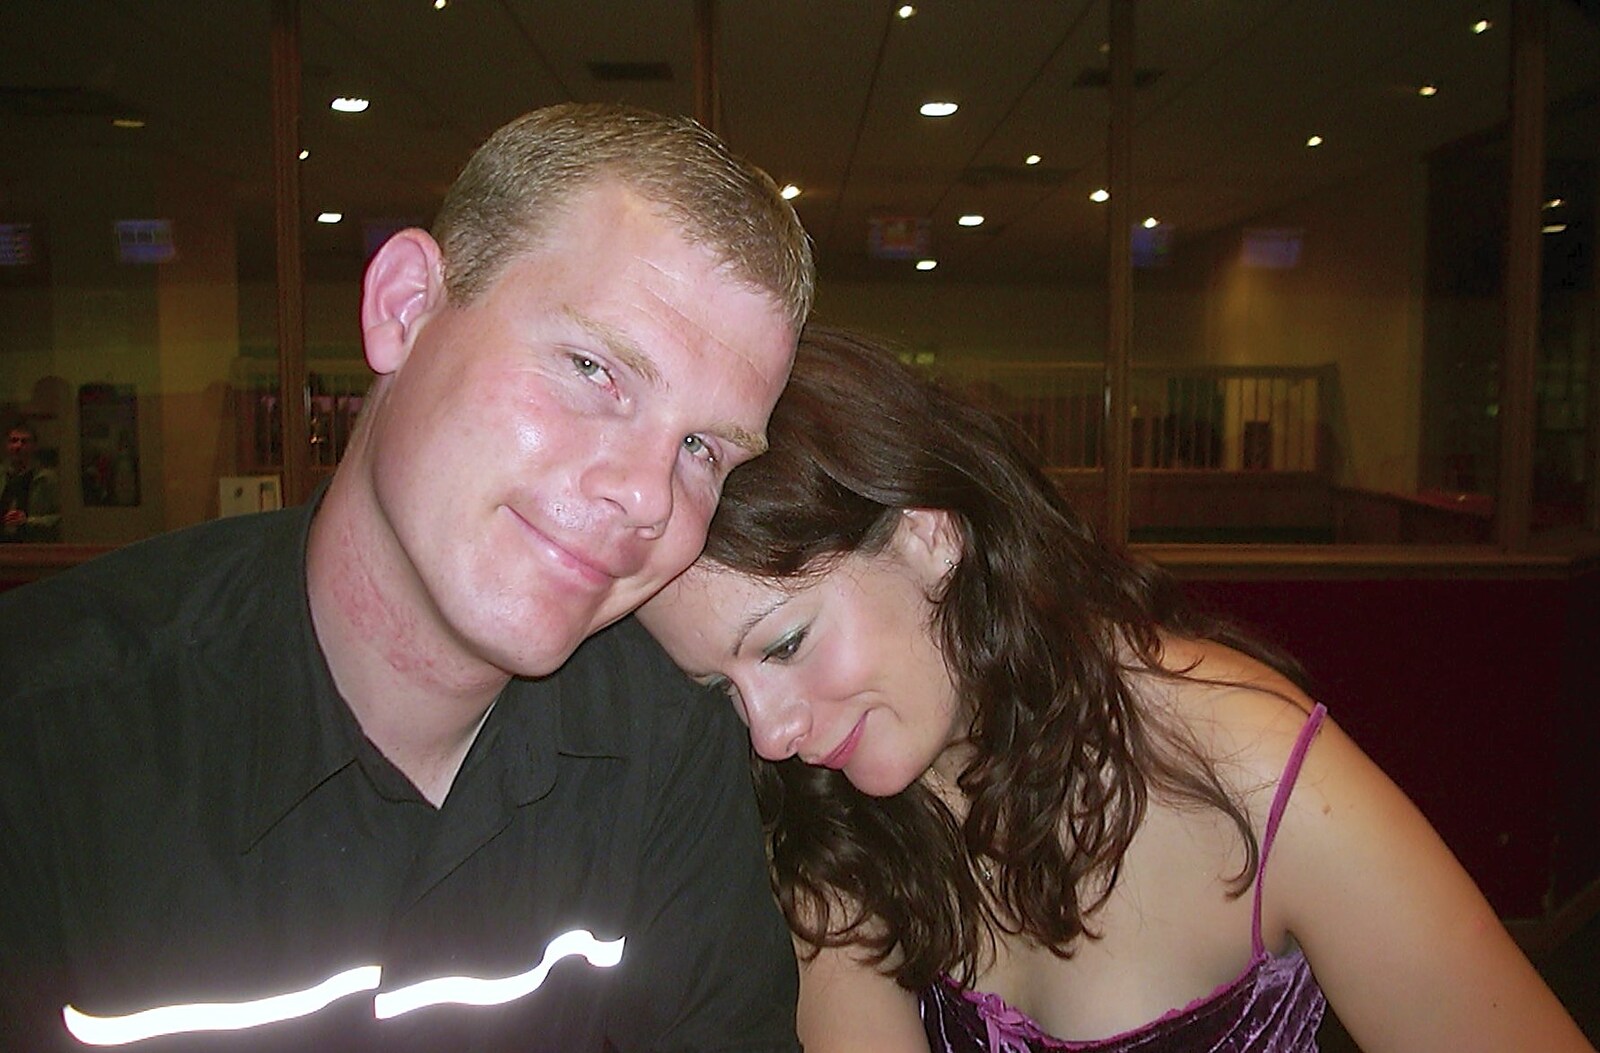 Mikey P and Clare from Ten Pin Bowling, Norwich, Norfolk - 13th September 2003